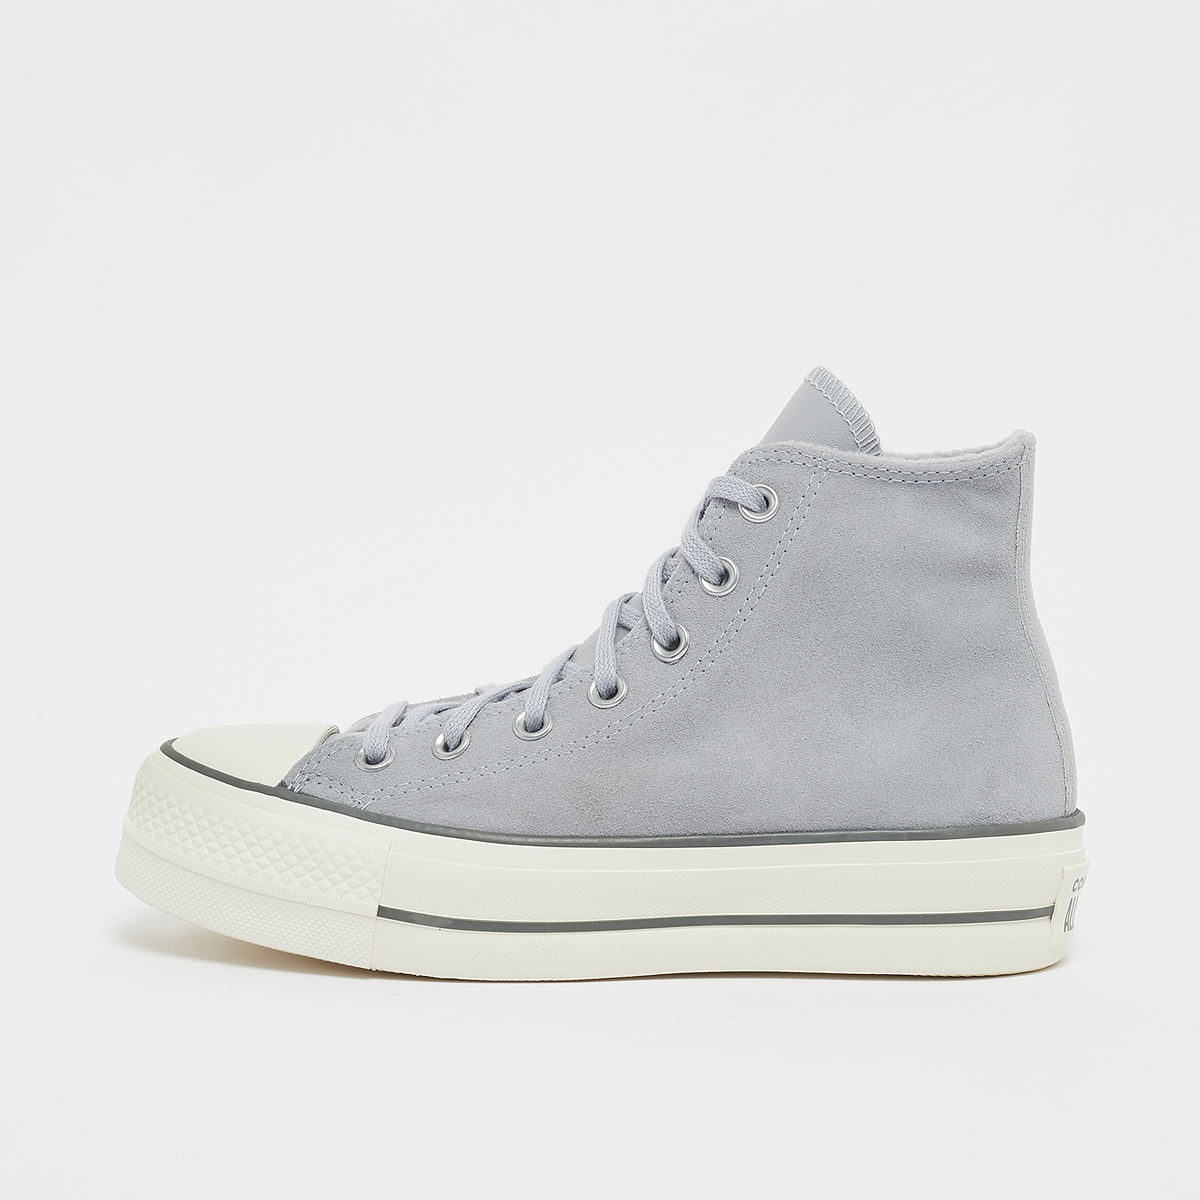 Productafbeelding: Chuck Taylor All Star Lift Cozy Utility